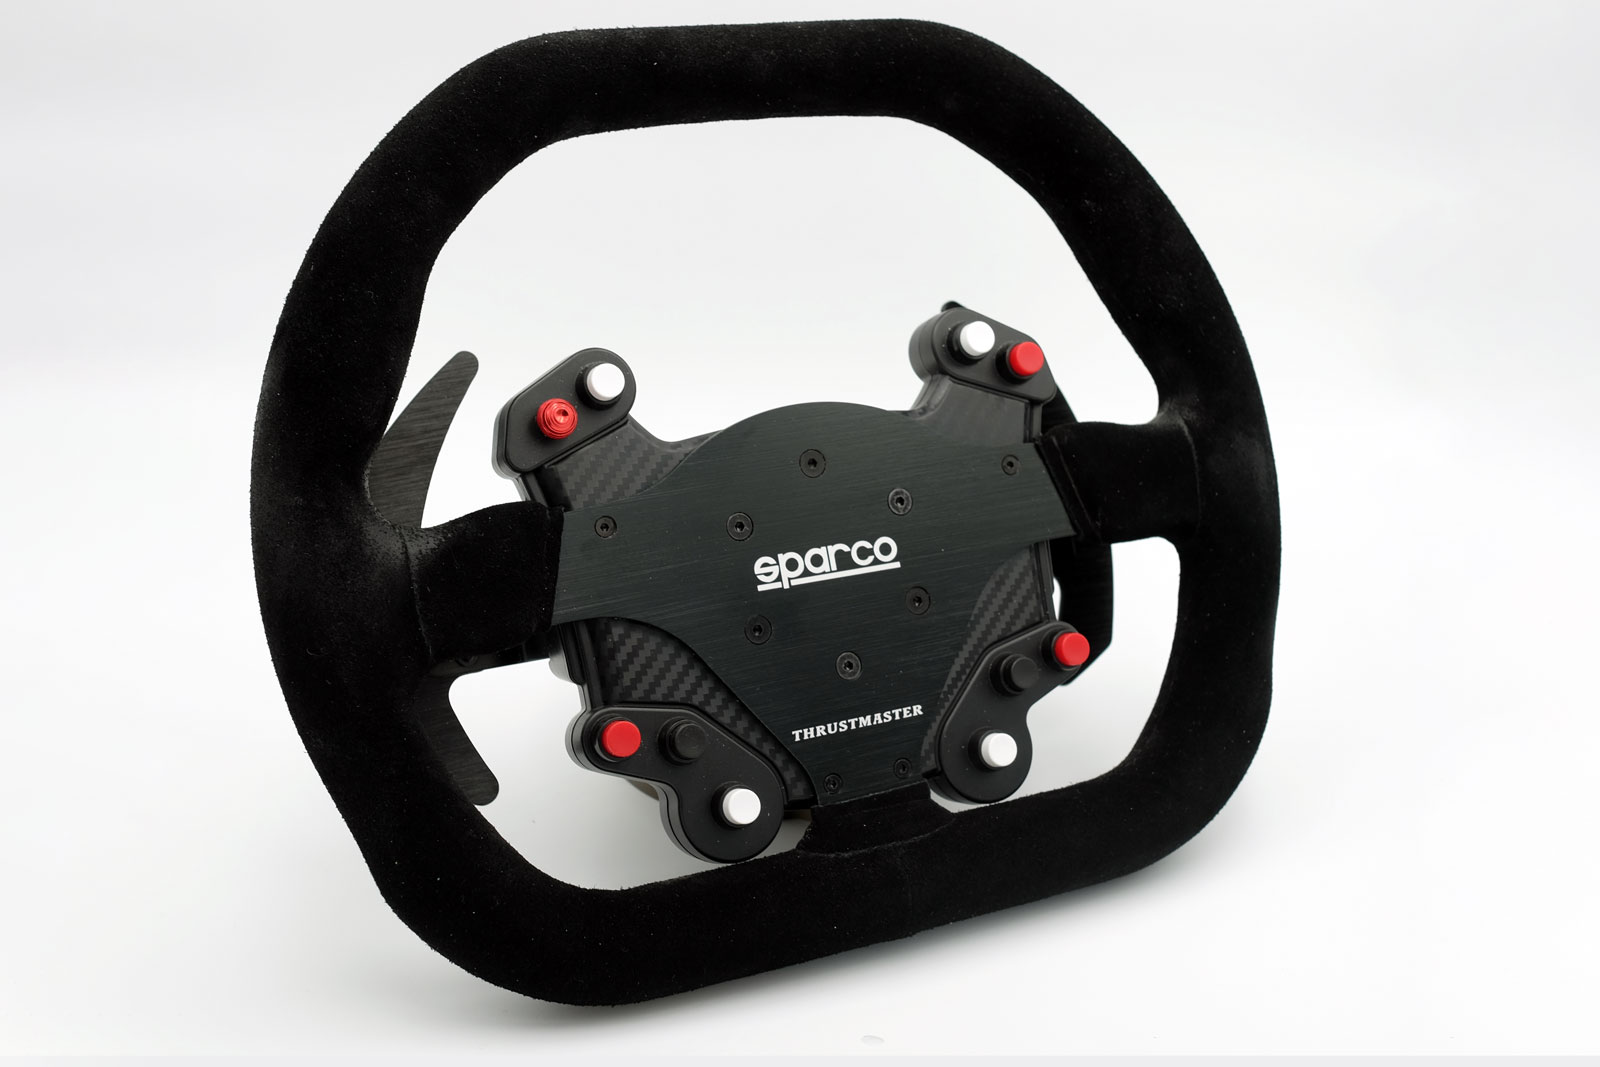 Thrustmaster T300 Servo Base Review: The Foundation - PC Perspective